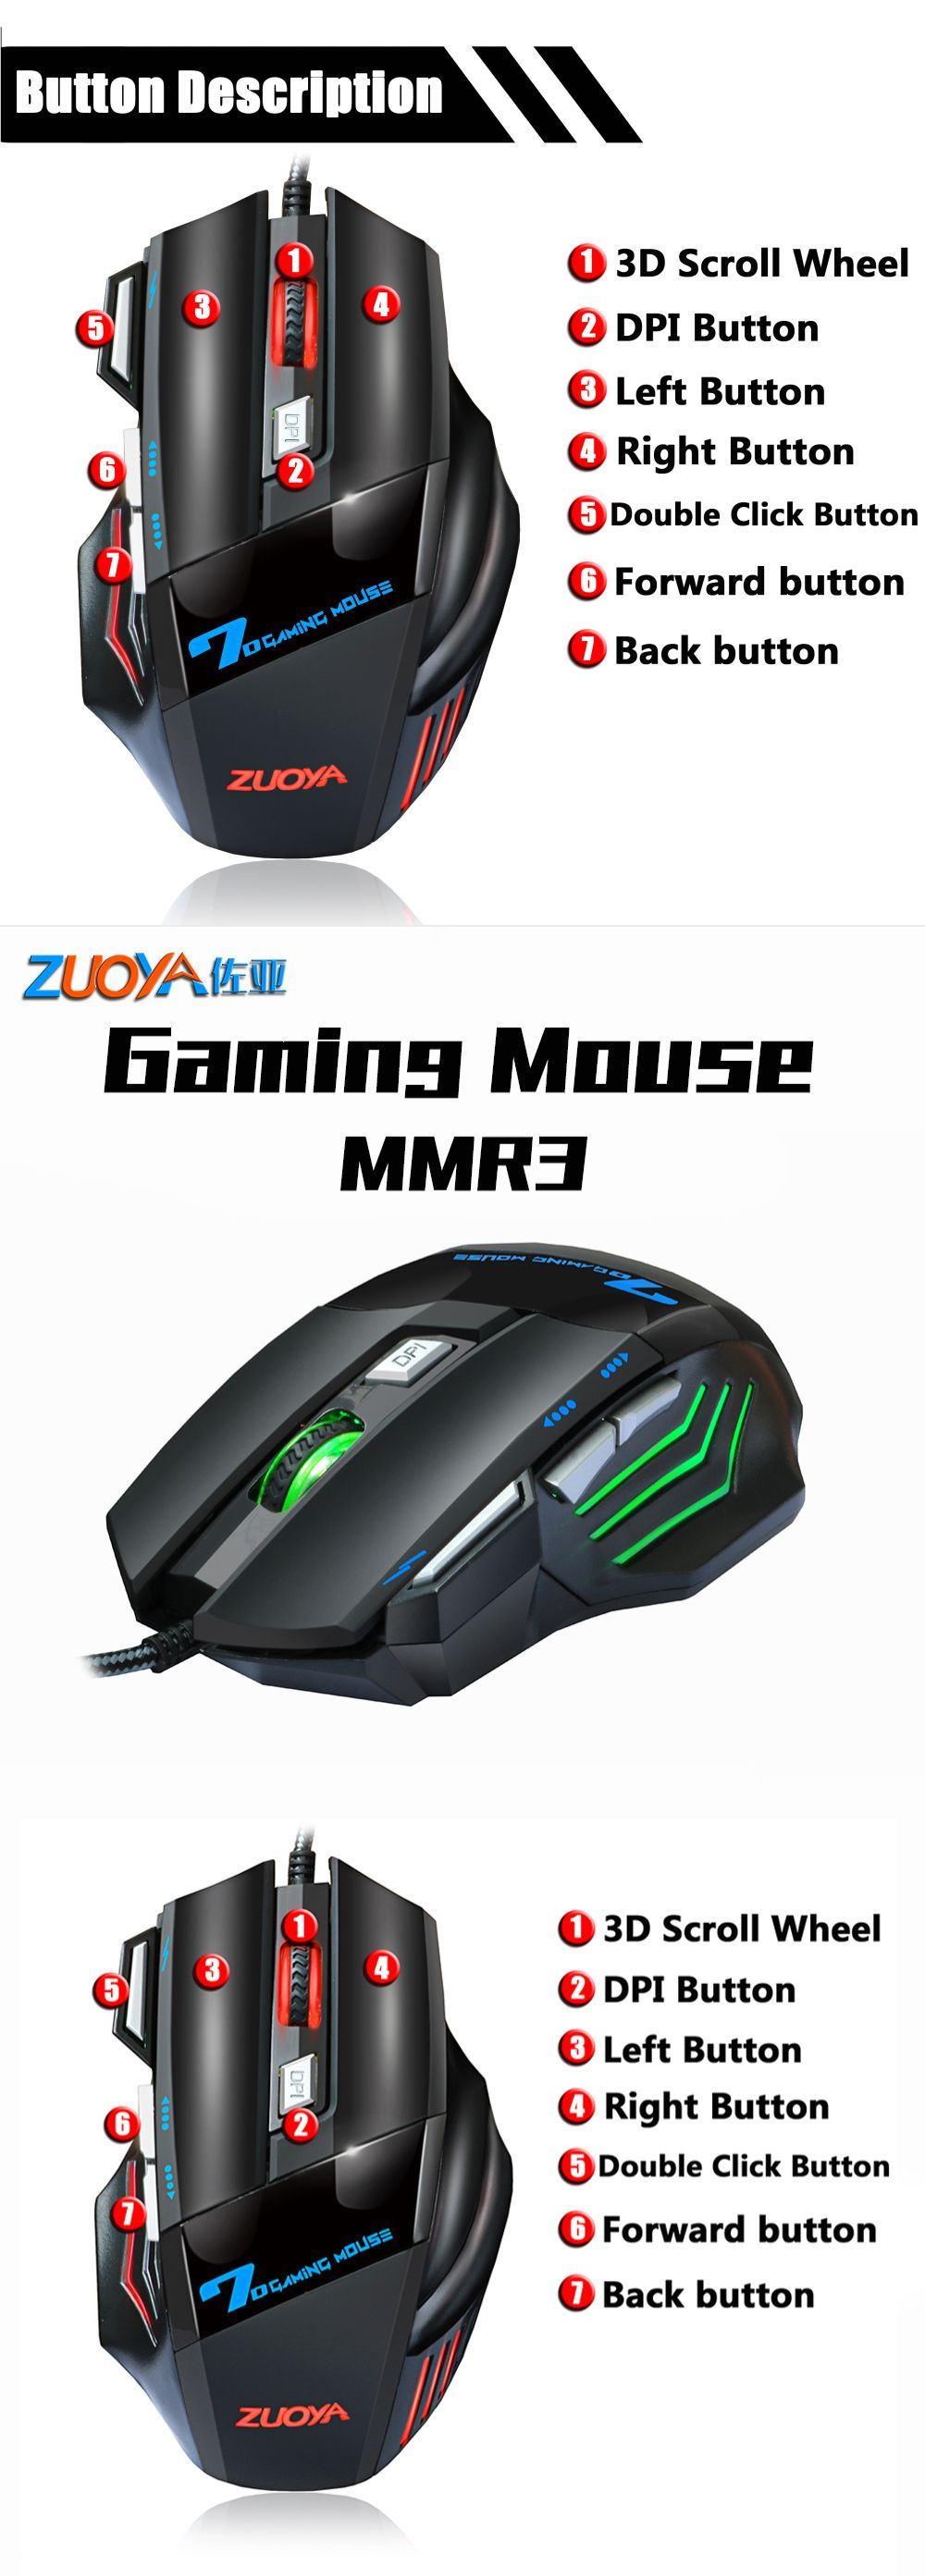 ZUOYA-MMR3-Wired-Mechanical-Gaming-Mouse-7-Keys-5500DPI-LED-Optical-USB-Mouse-Mice-Game-Mouse-Silent-1615039